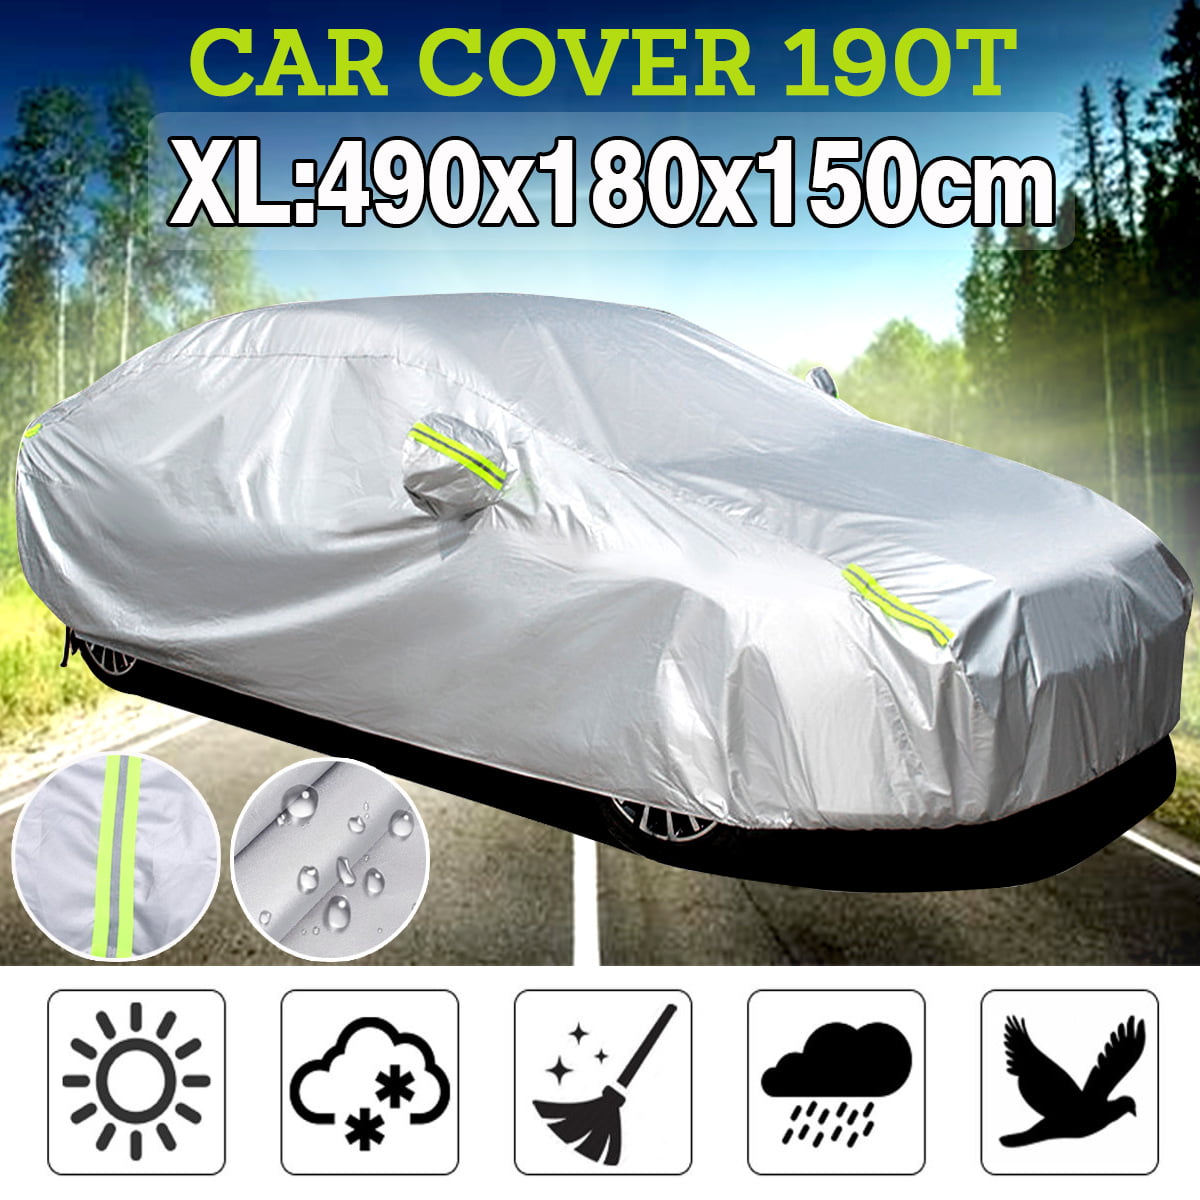 Full Auto Car Cover for Mazda 6 Motor Trend Waterproof Indoor Outdoor Protection